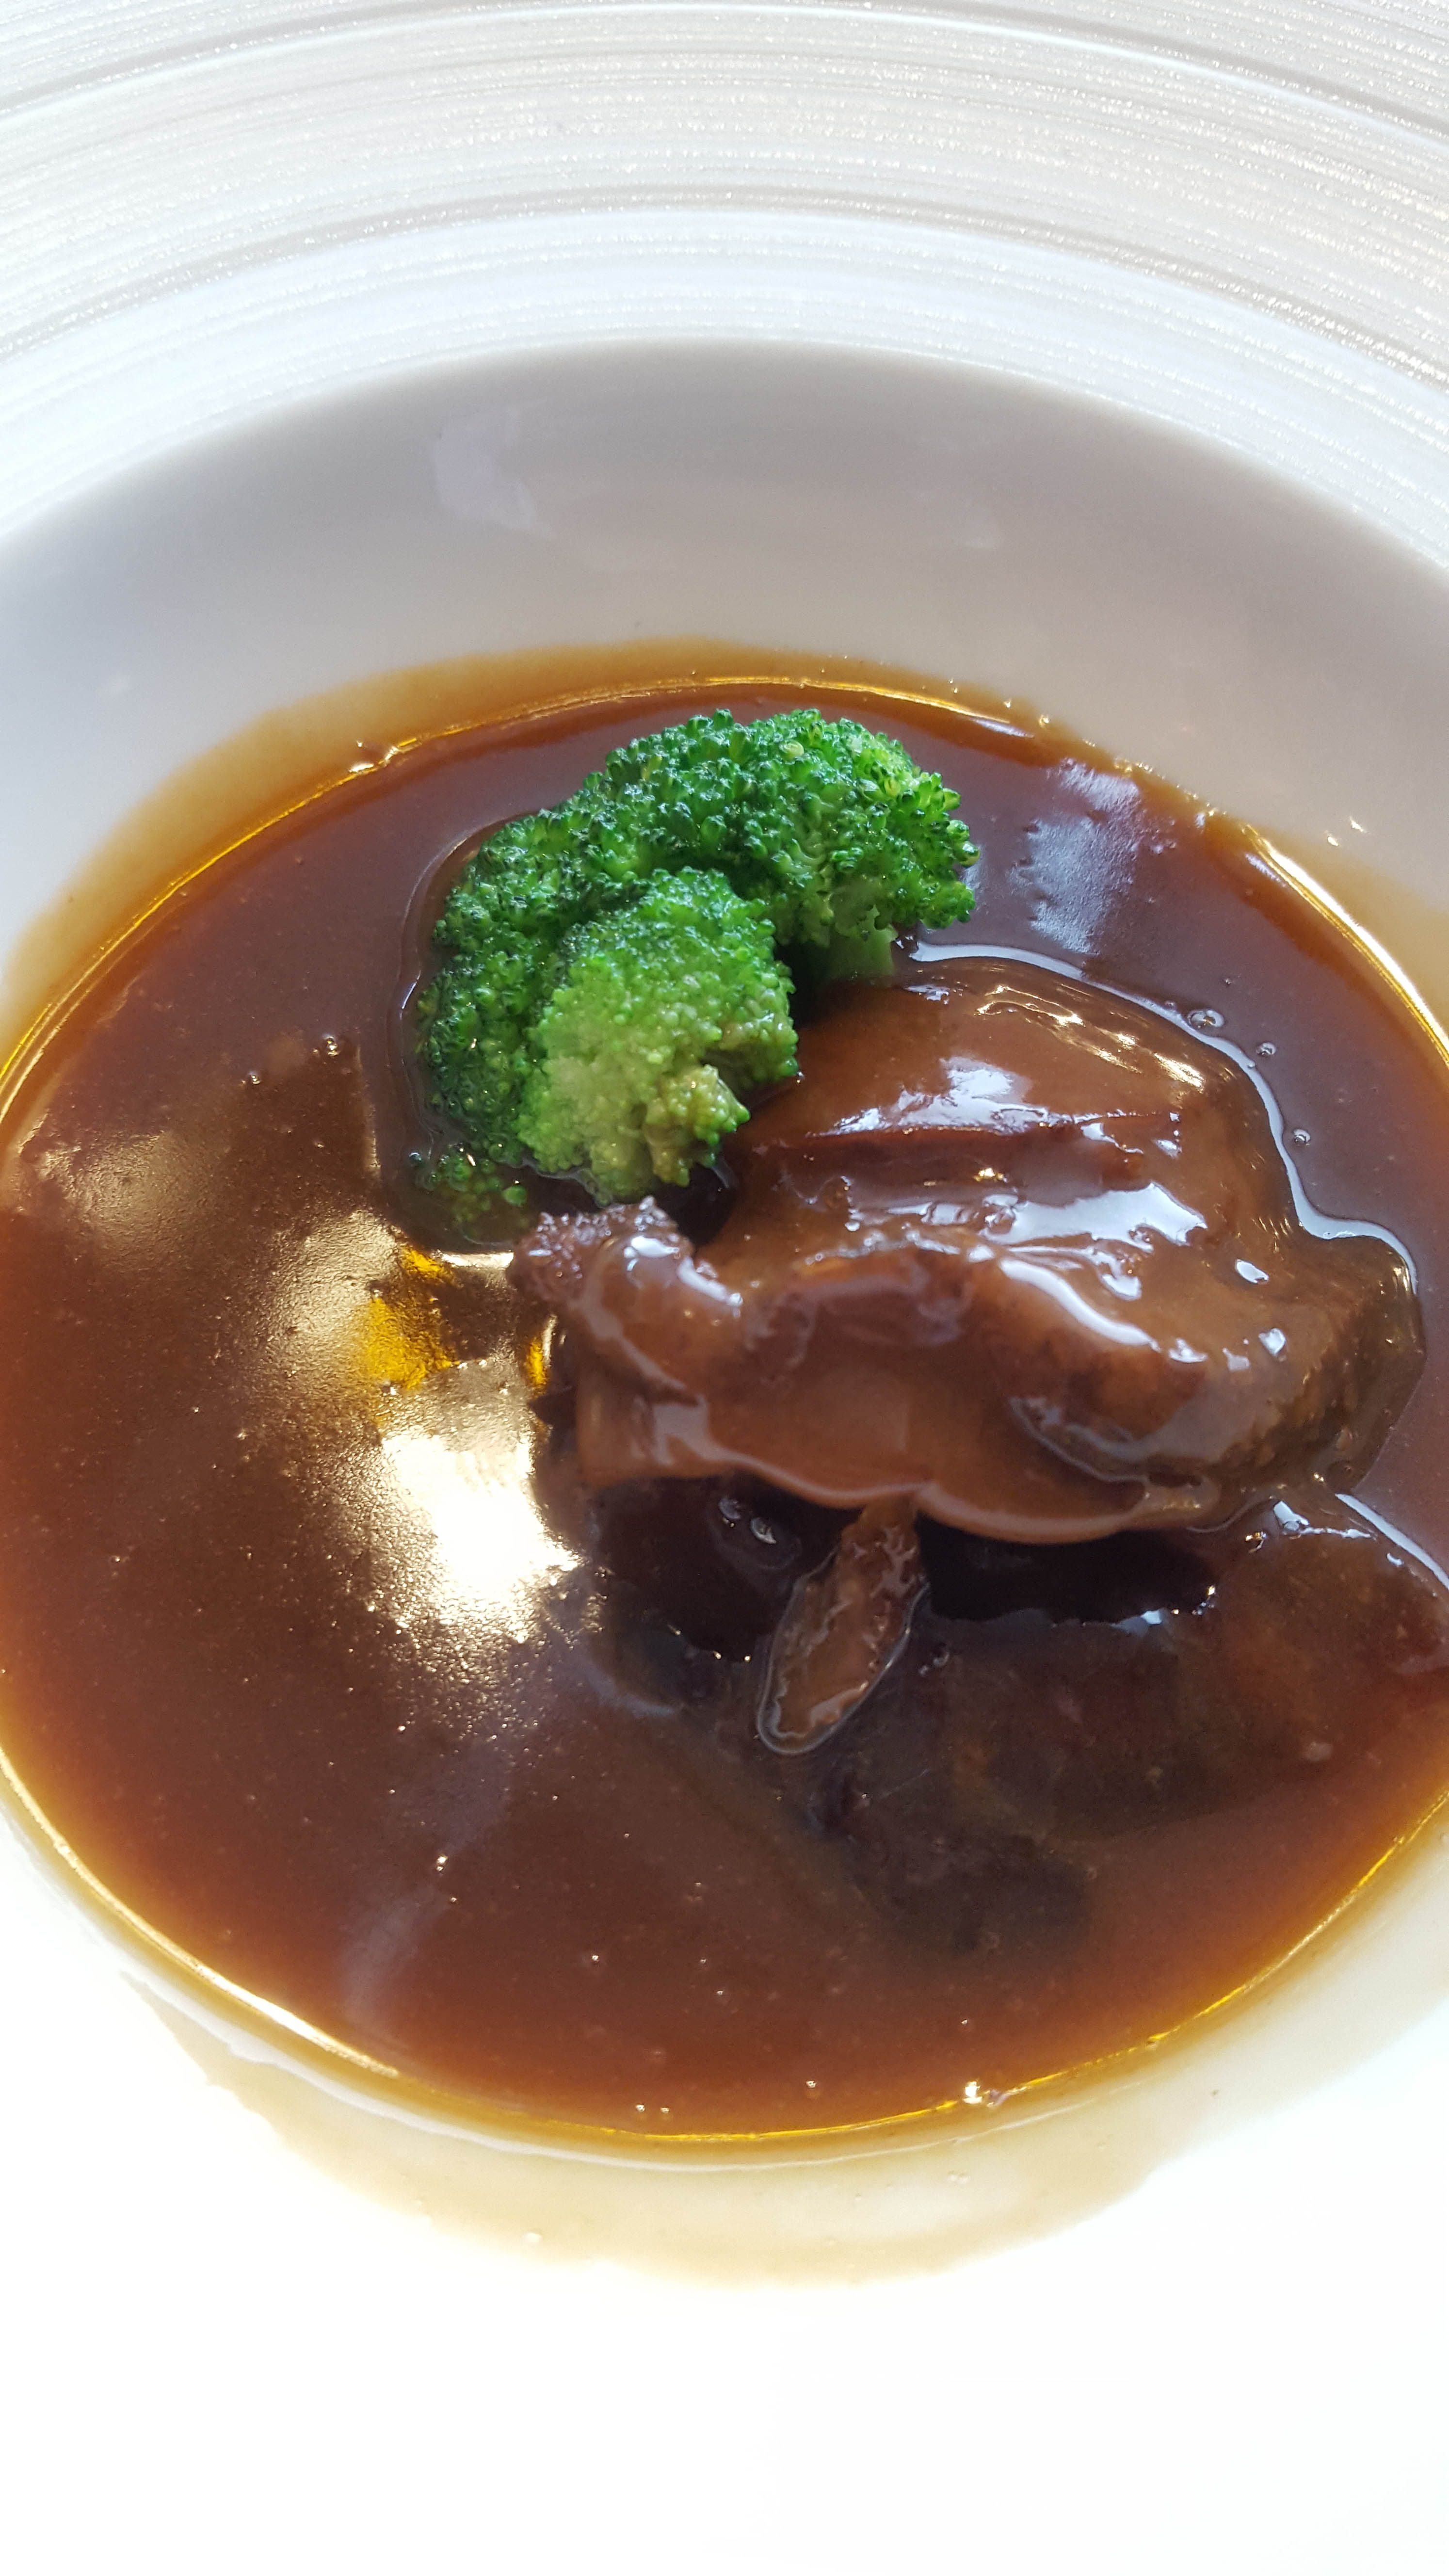 Braised whole South African abalone in oyster sauce. Photo courtesy of Tedrick Yau 